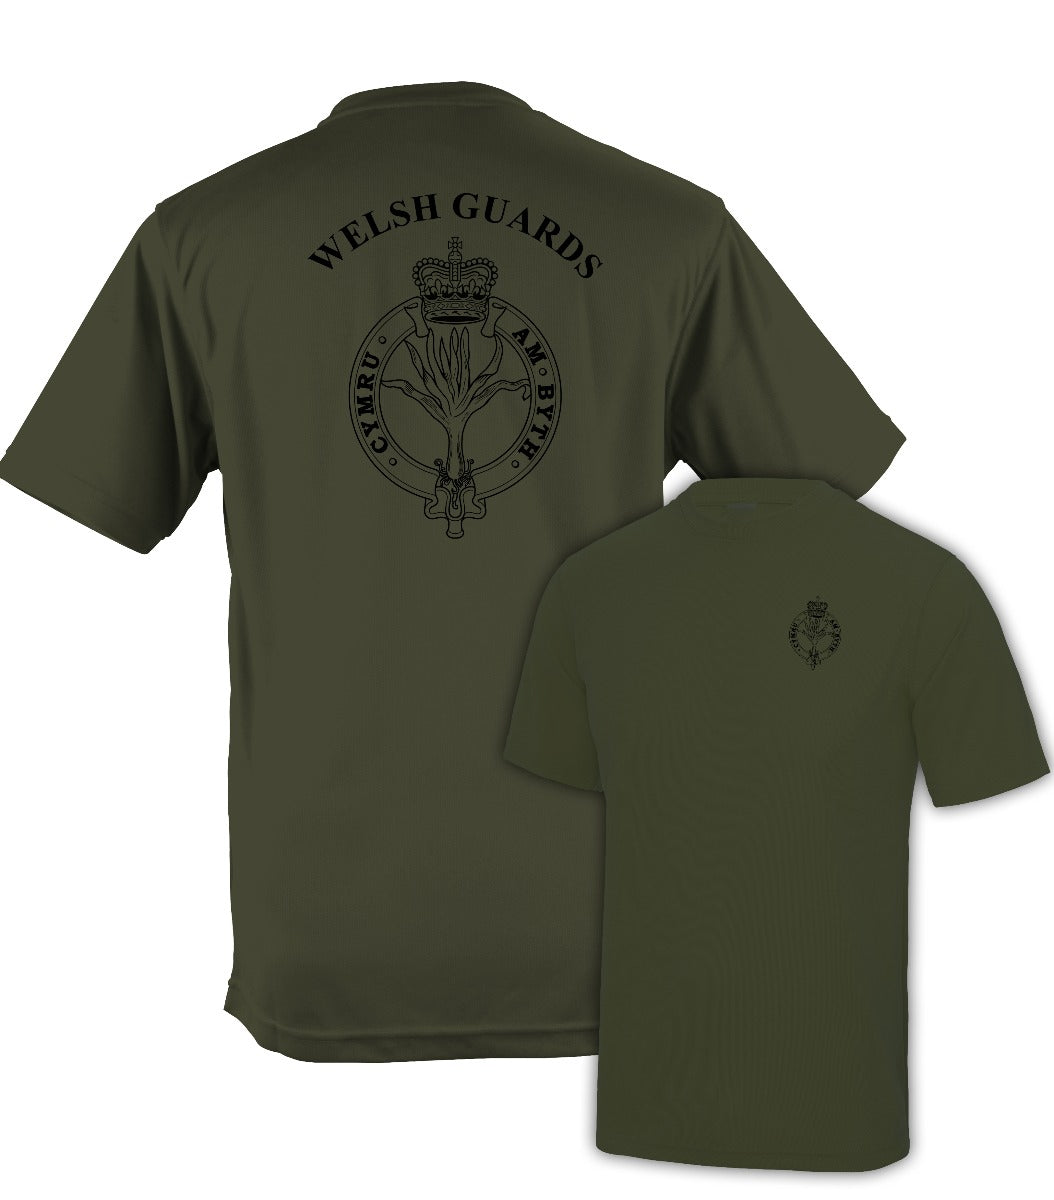 Fully Printed Welsh Guards (WG) Wicking Fabric T-shirt